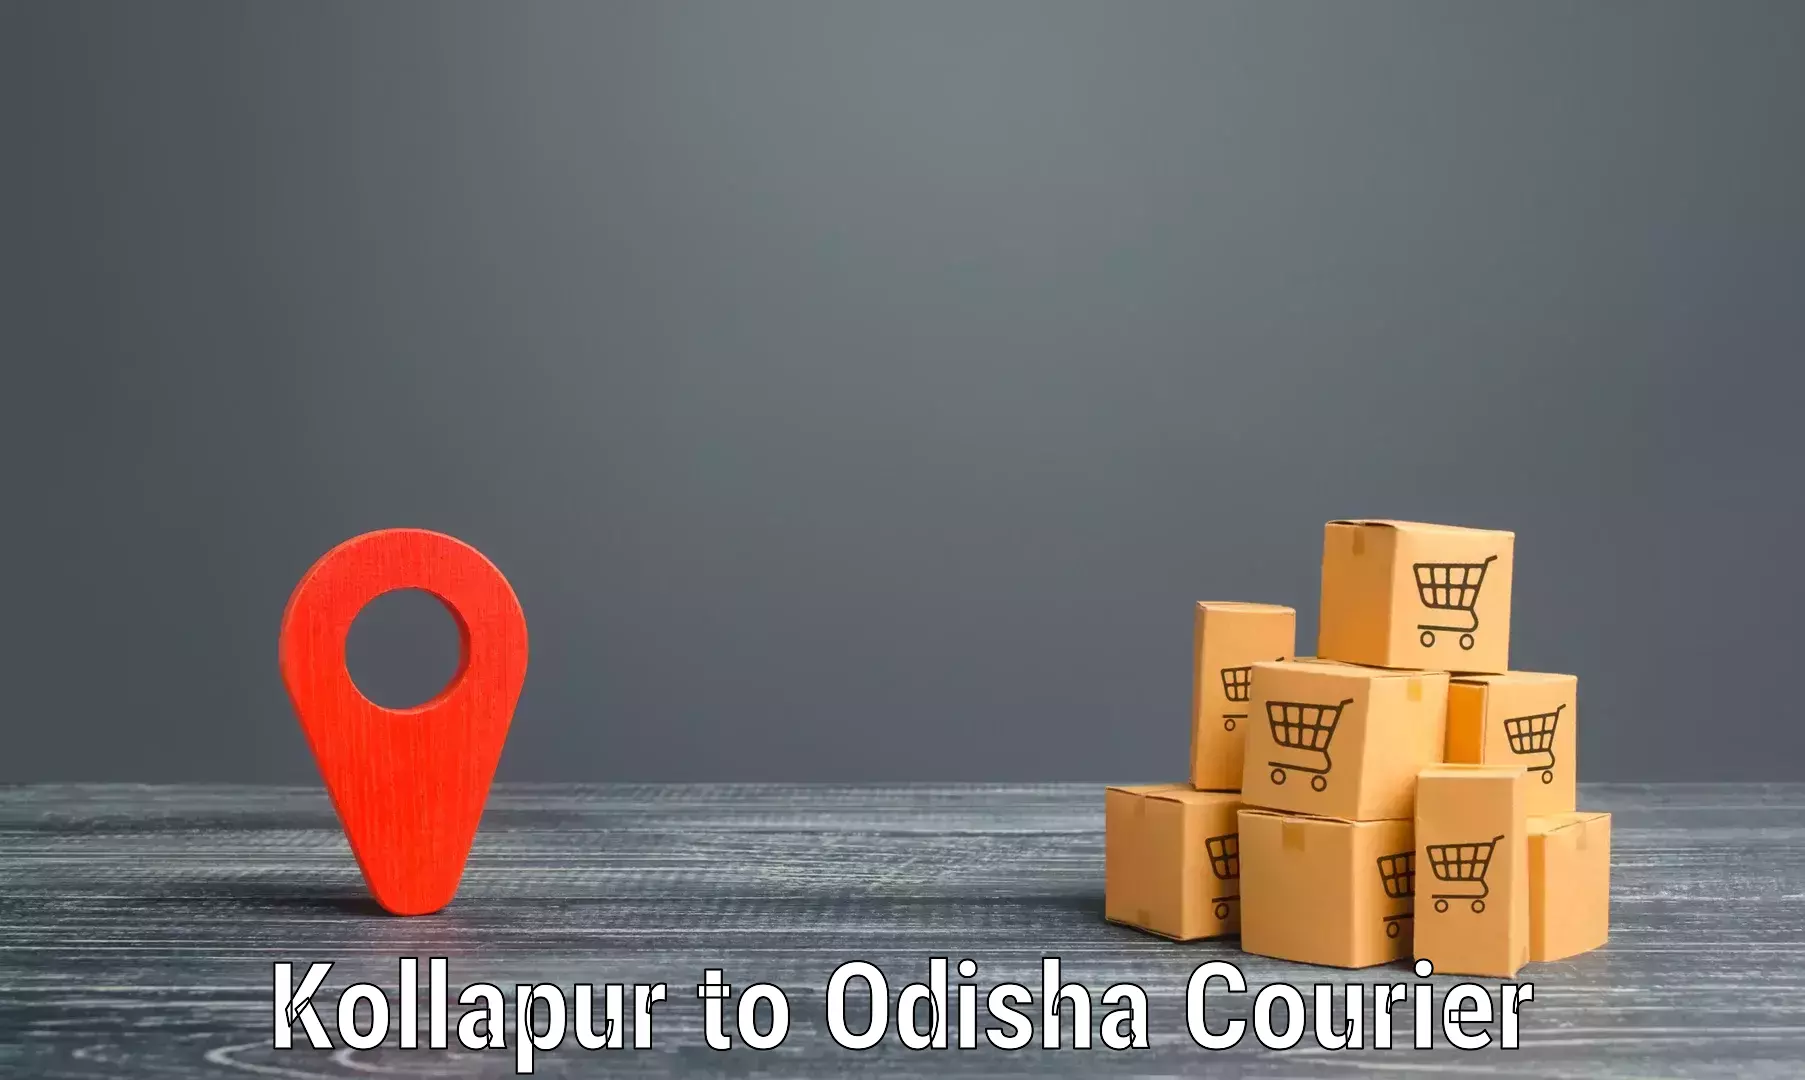 Personal parcel delivery in Kollapur to Chatrapur